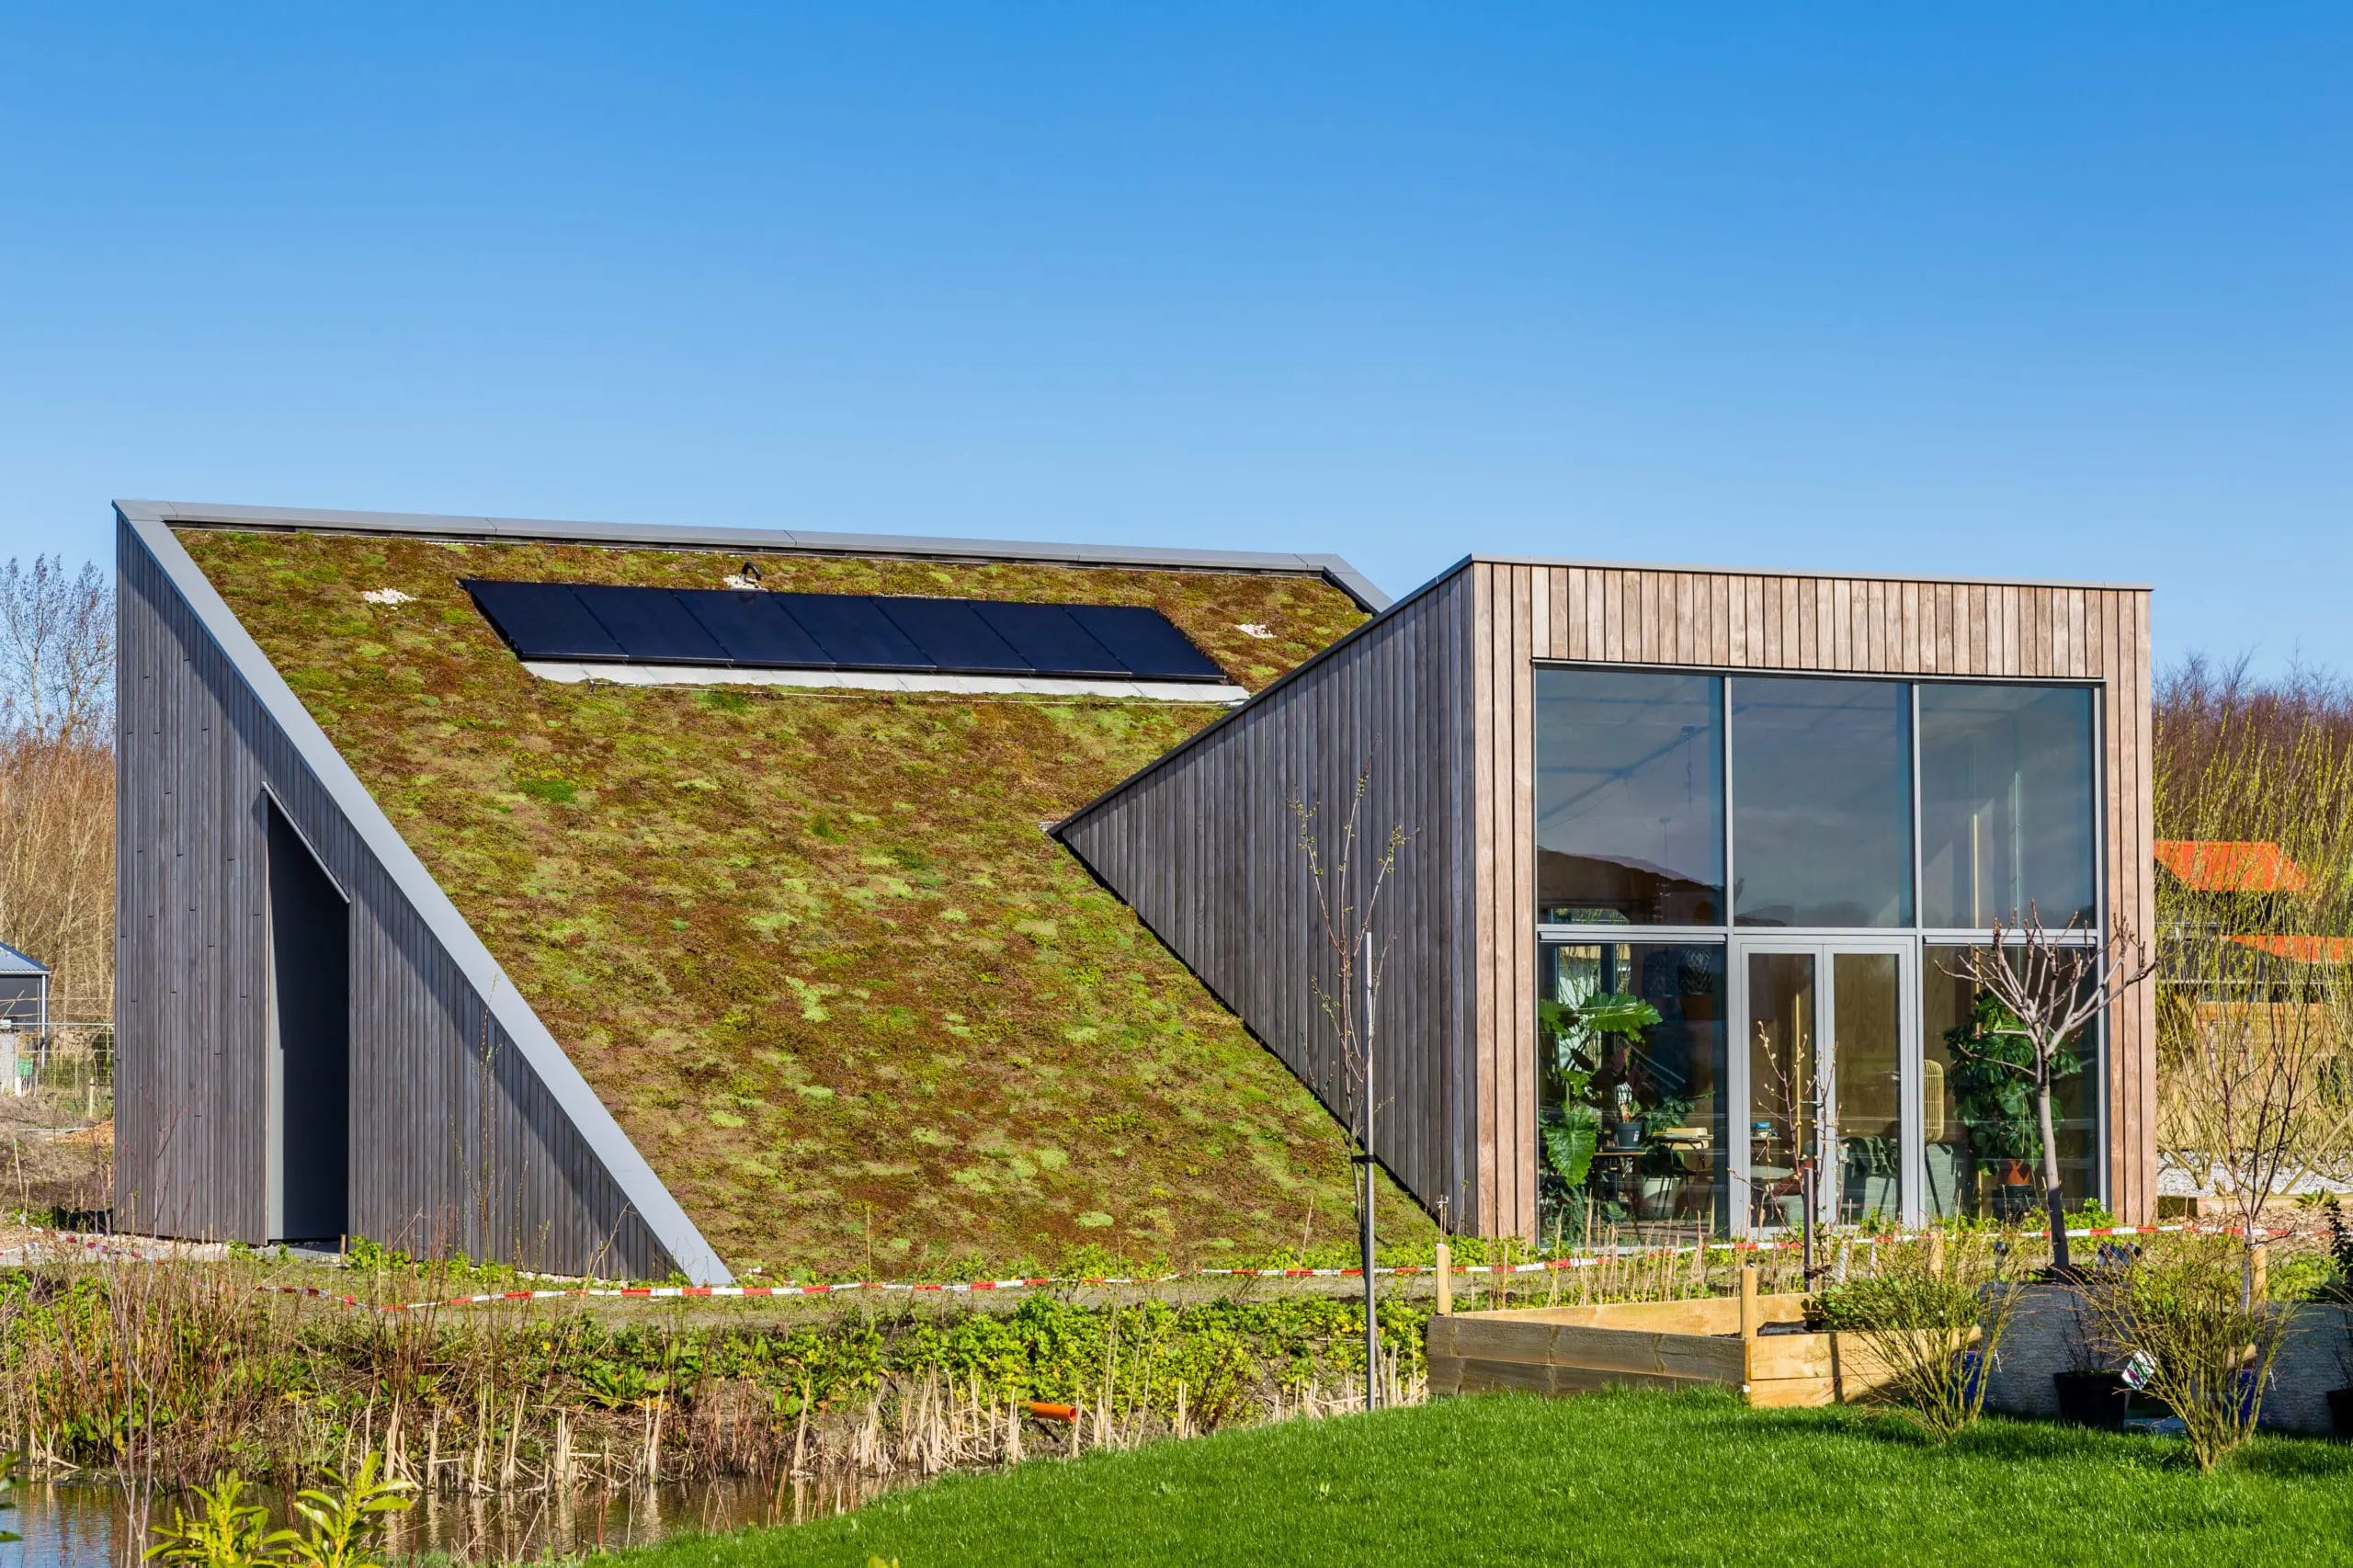 Top 5 Eco Friendly Materials For Your Next Home Renovation